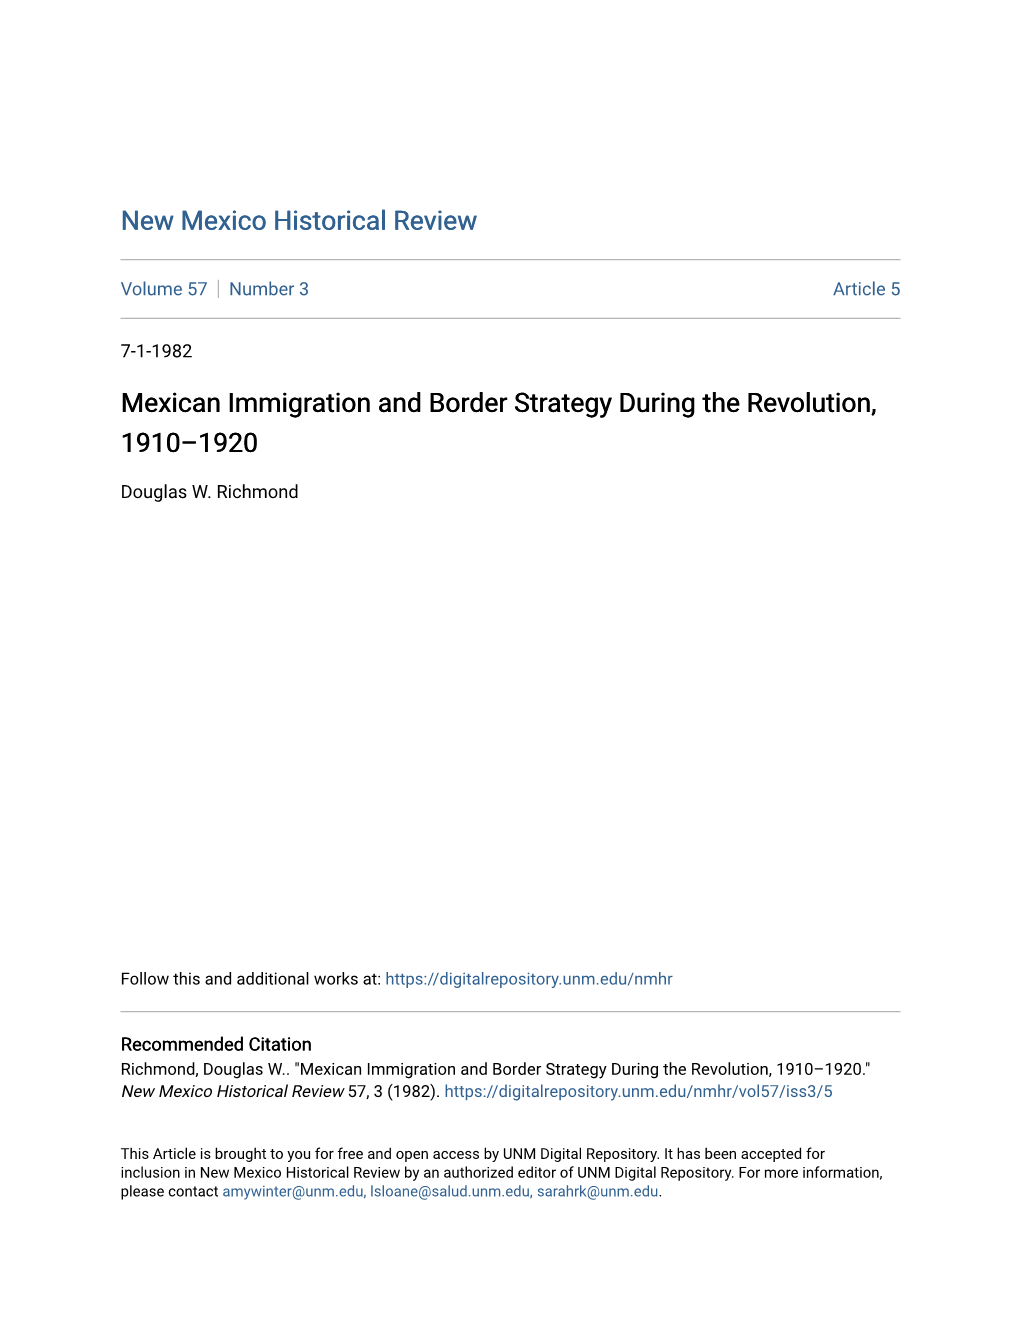 Mexican Immigration and Border Strategy During the Revolution, 1910Â•Fi1920